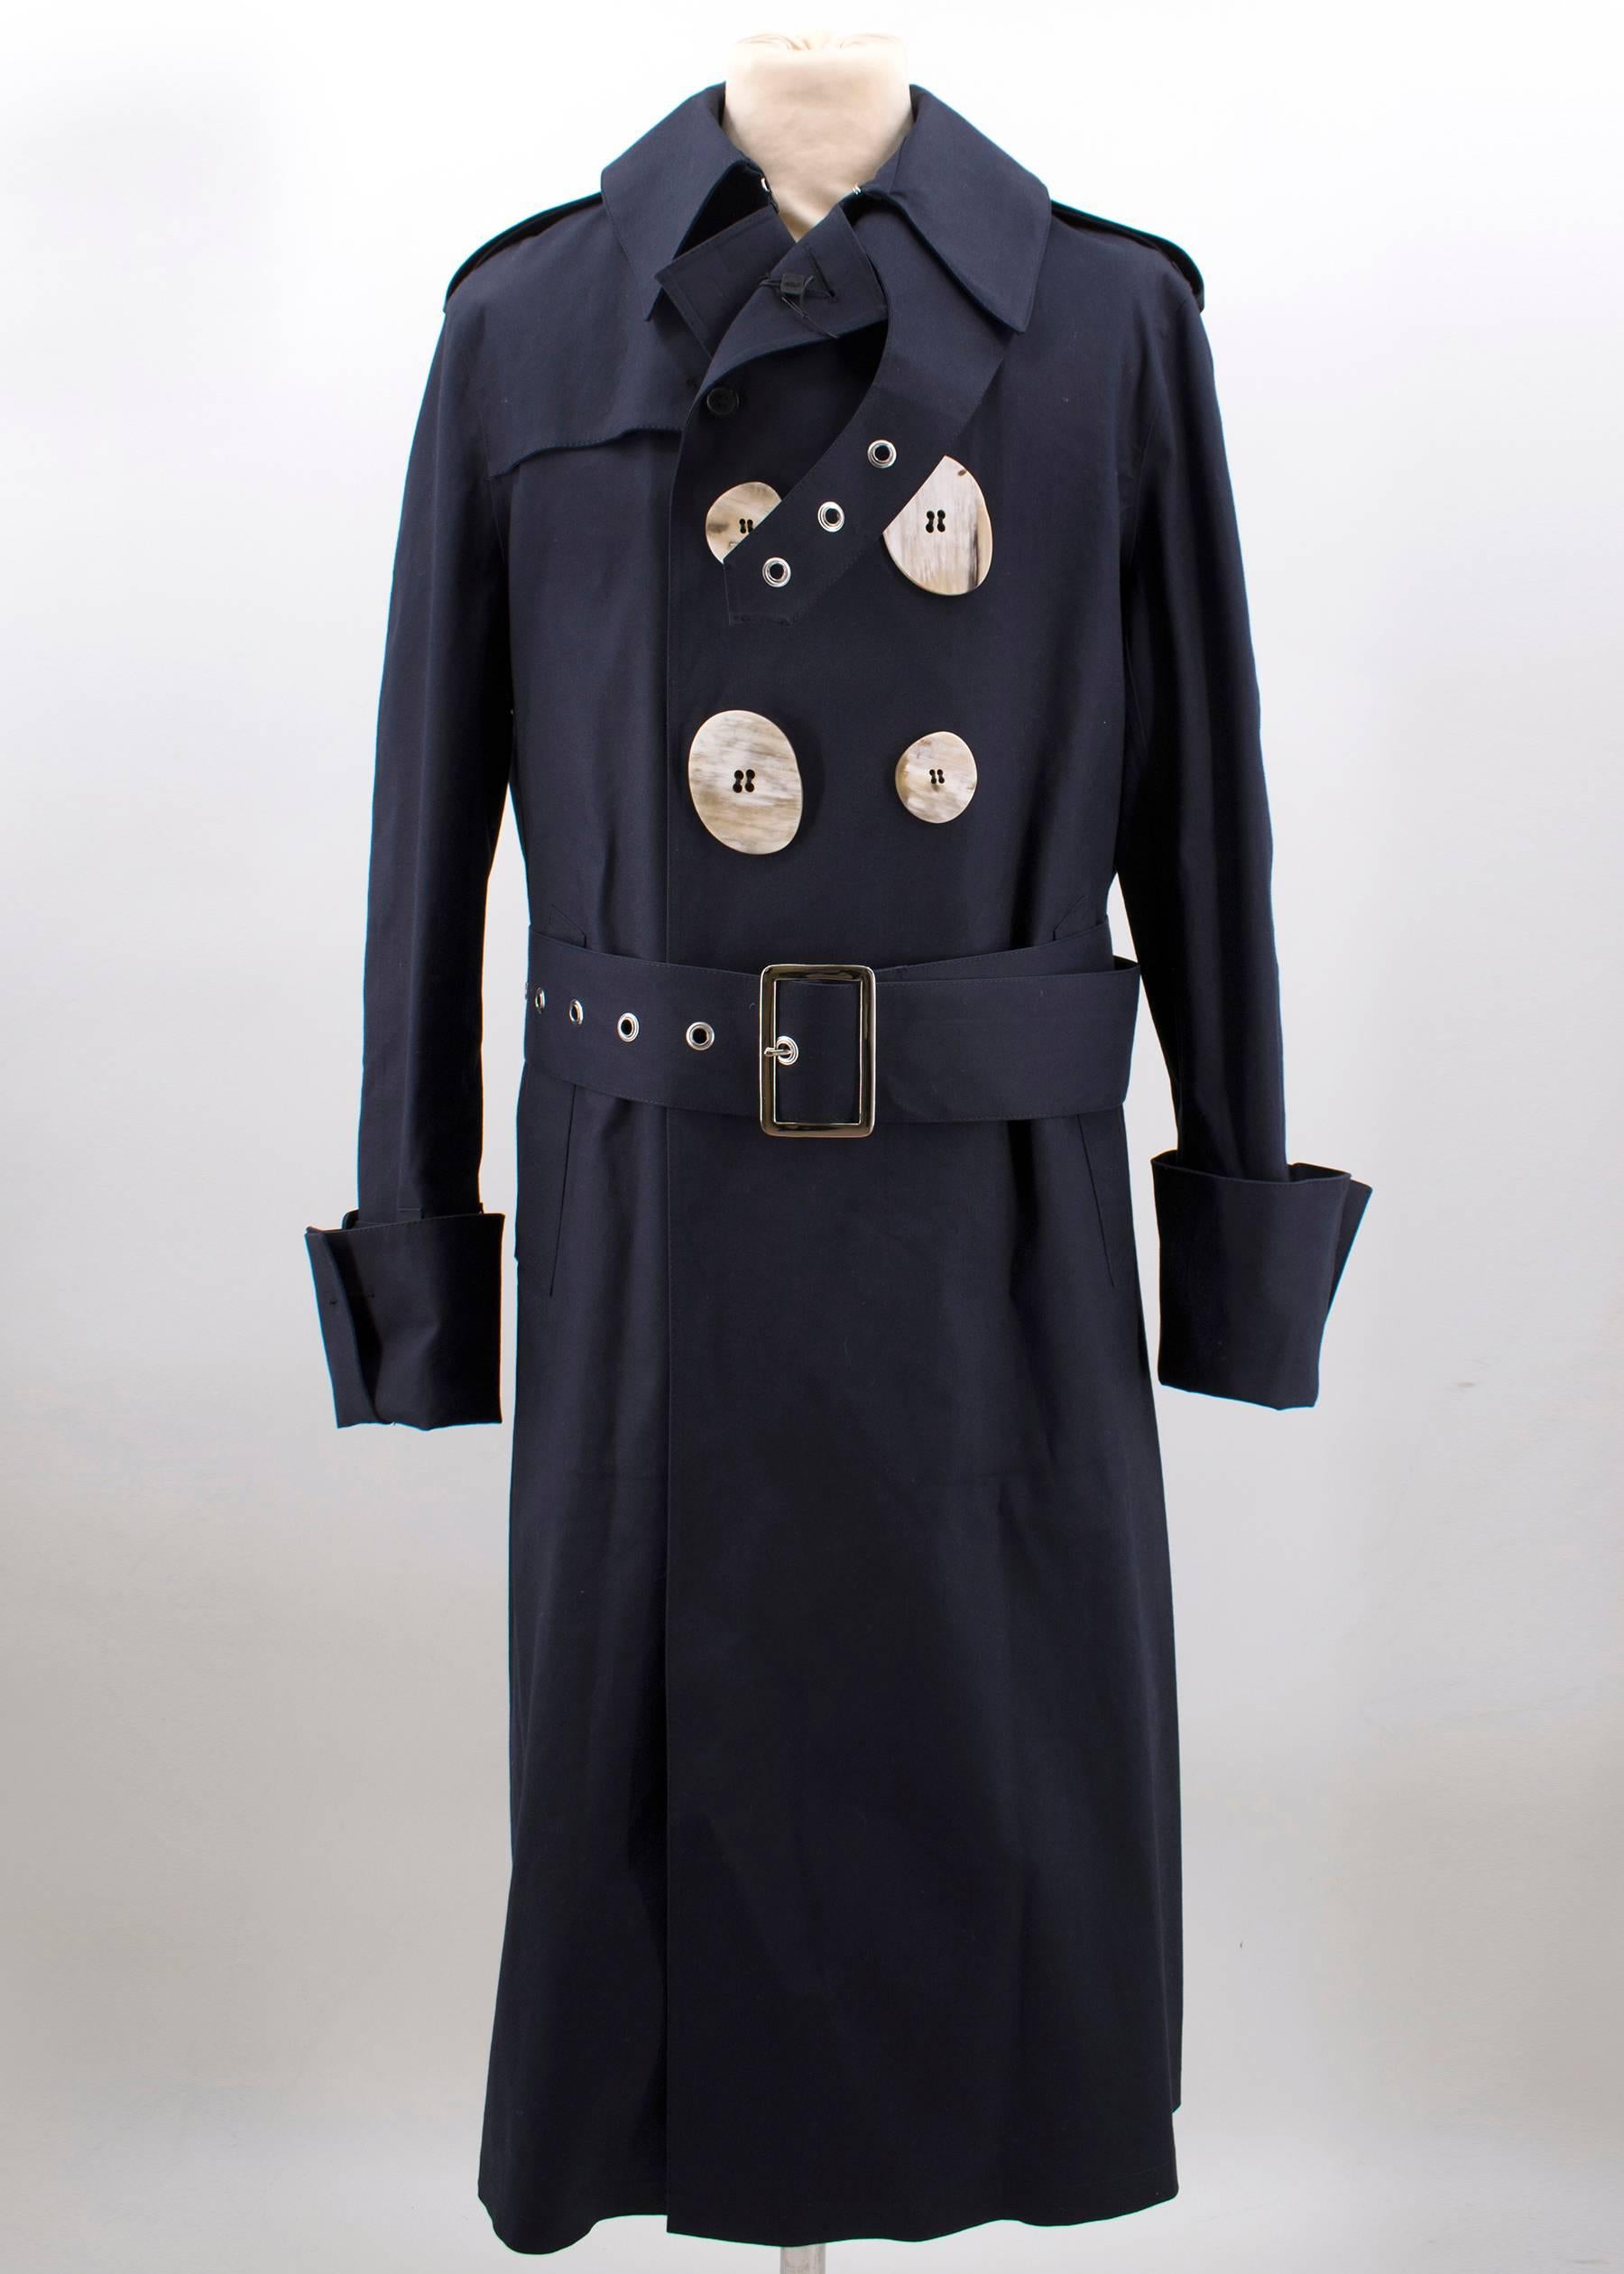 Mackintosh Men's navy trench coat. 
Made in Scotland. 

Collaboration between J.W.Anderson + Mackintosh. 

Genuine handmade. 
100% Cotton bonded. 

Features exaggerated proportions on classic Mackintosh trench, features signature J.W.Anderson horn